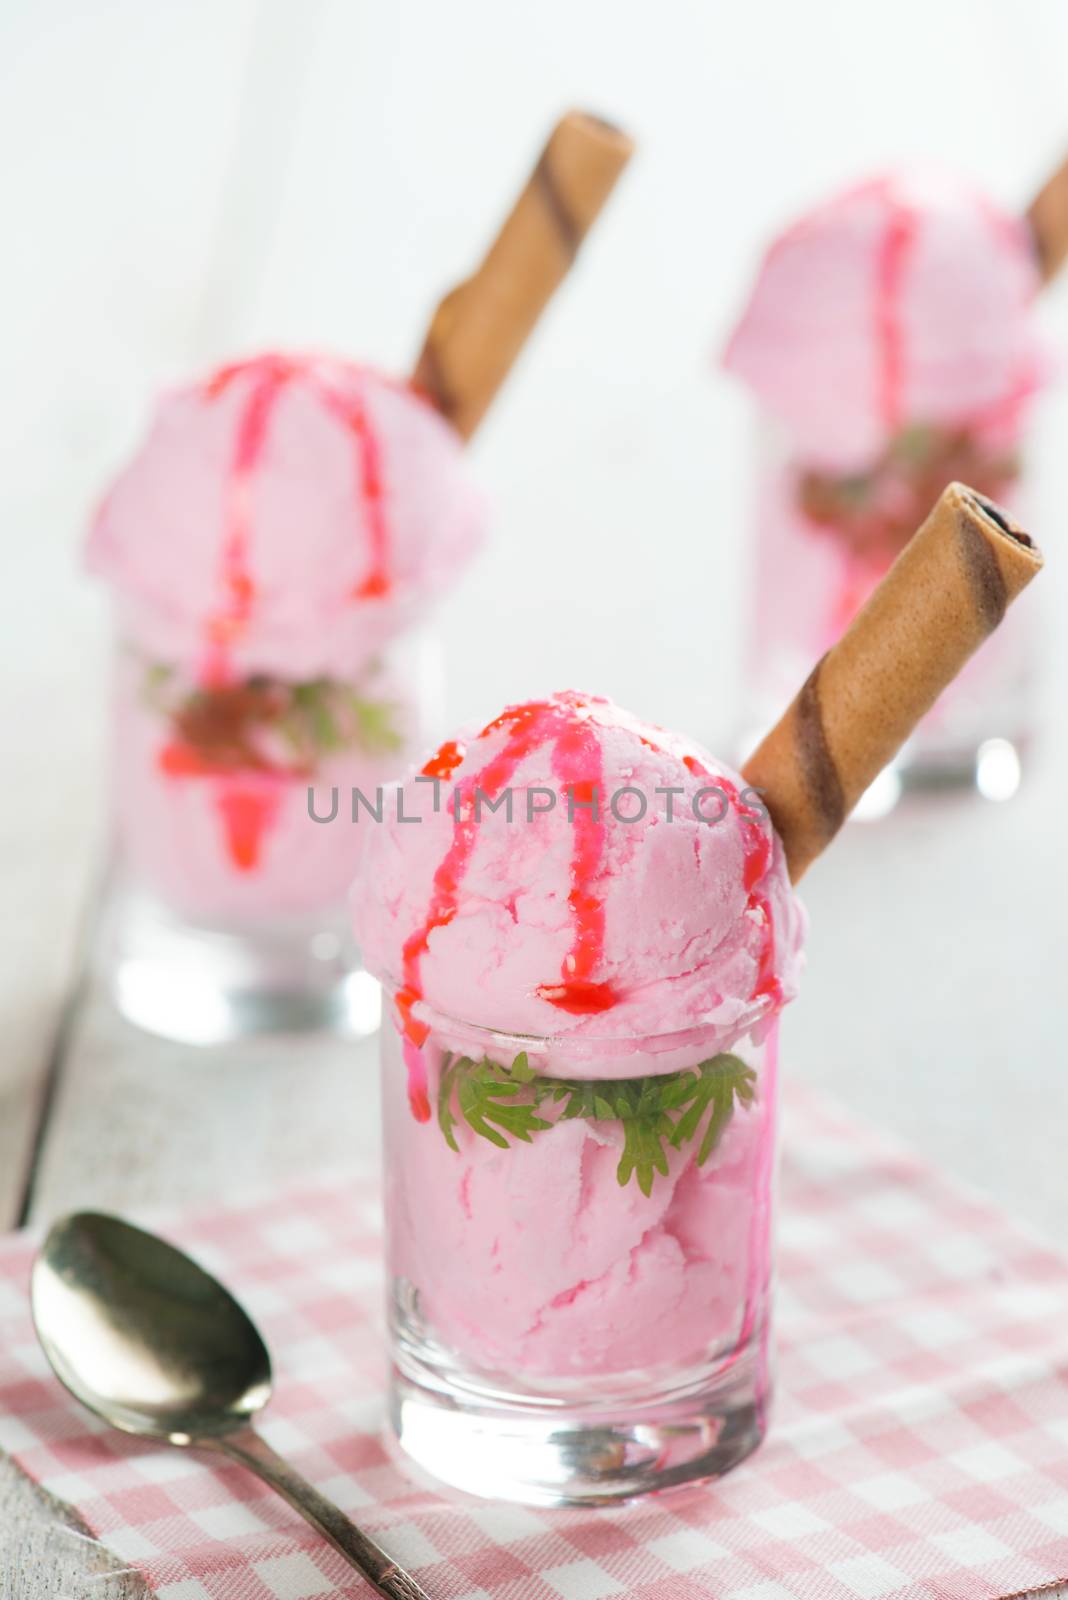 Scoops pink ice cream in glass cup with waffle on wooden vintage table background.